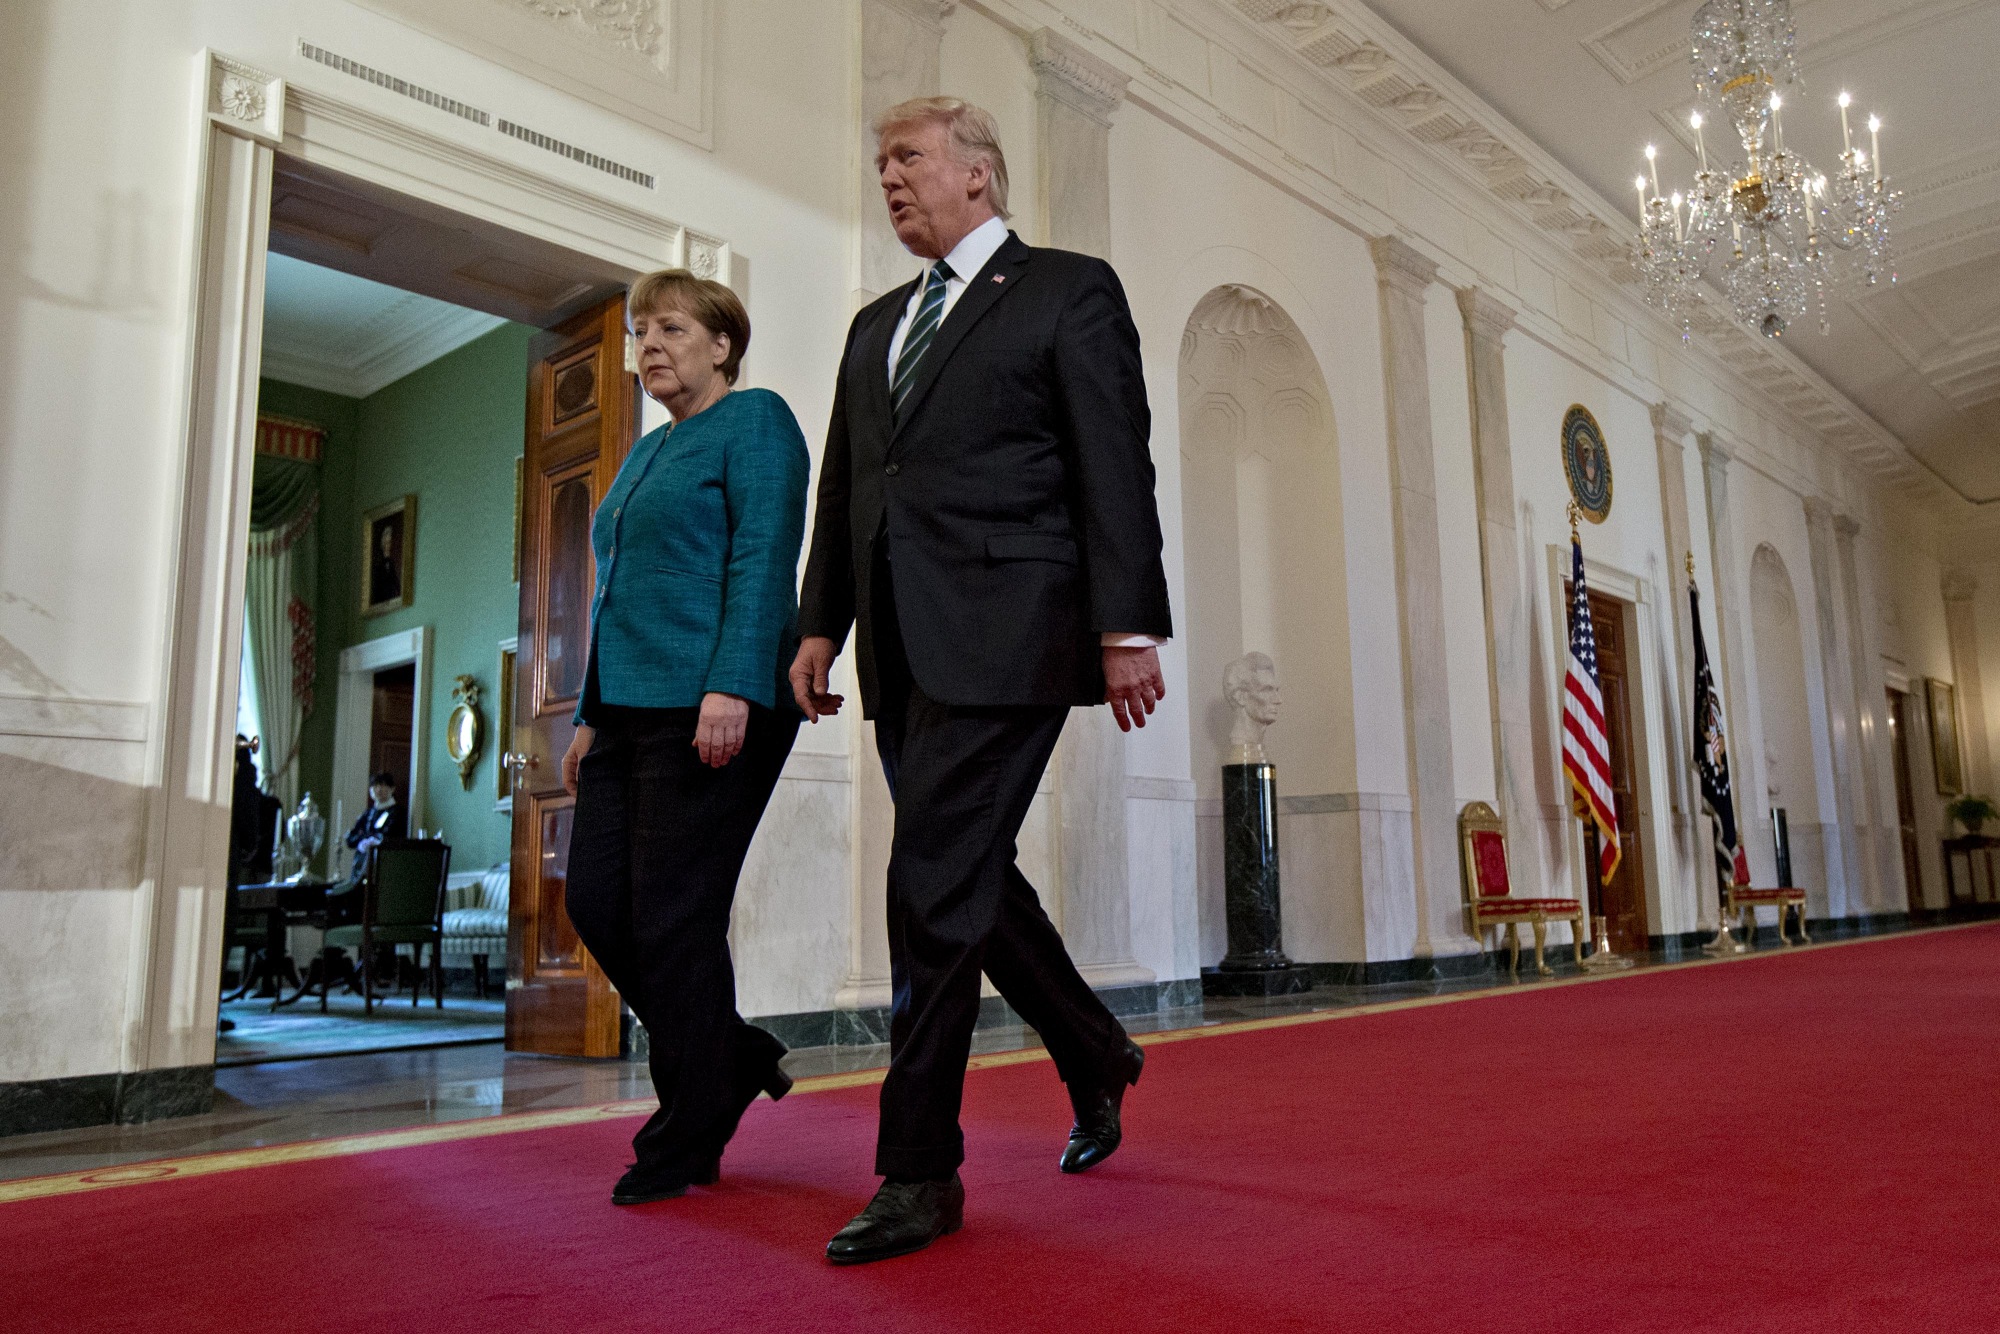 Merkel and Trump at the White House in&nbsp;March&nbsp;2017.&nbsp;